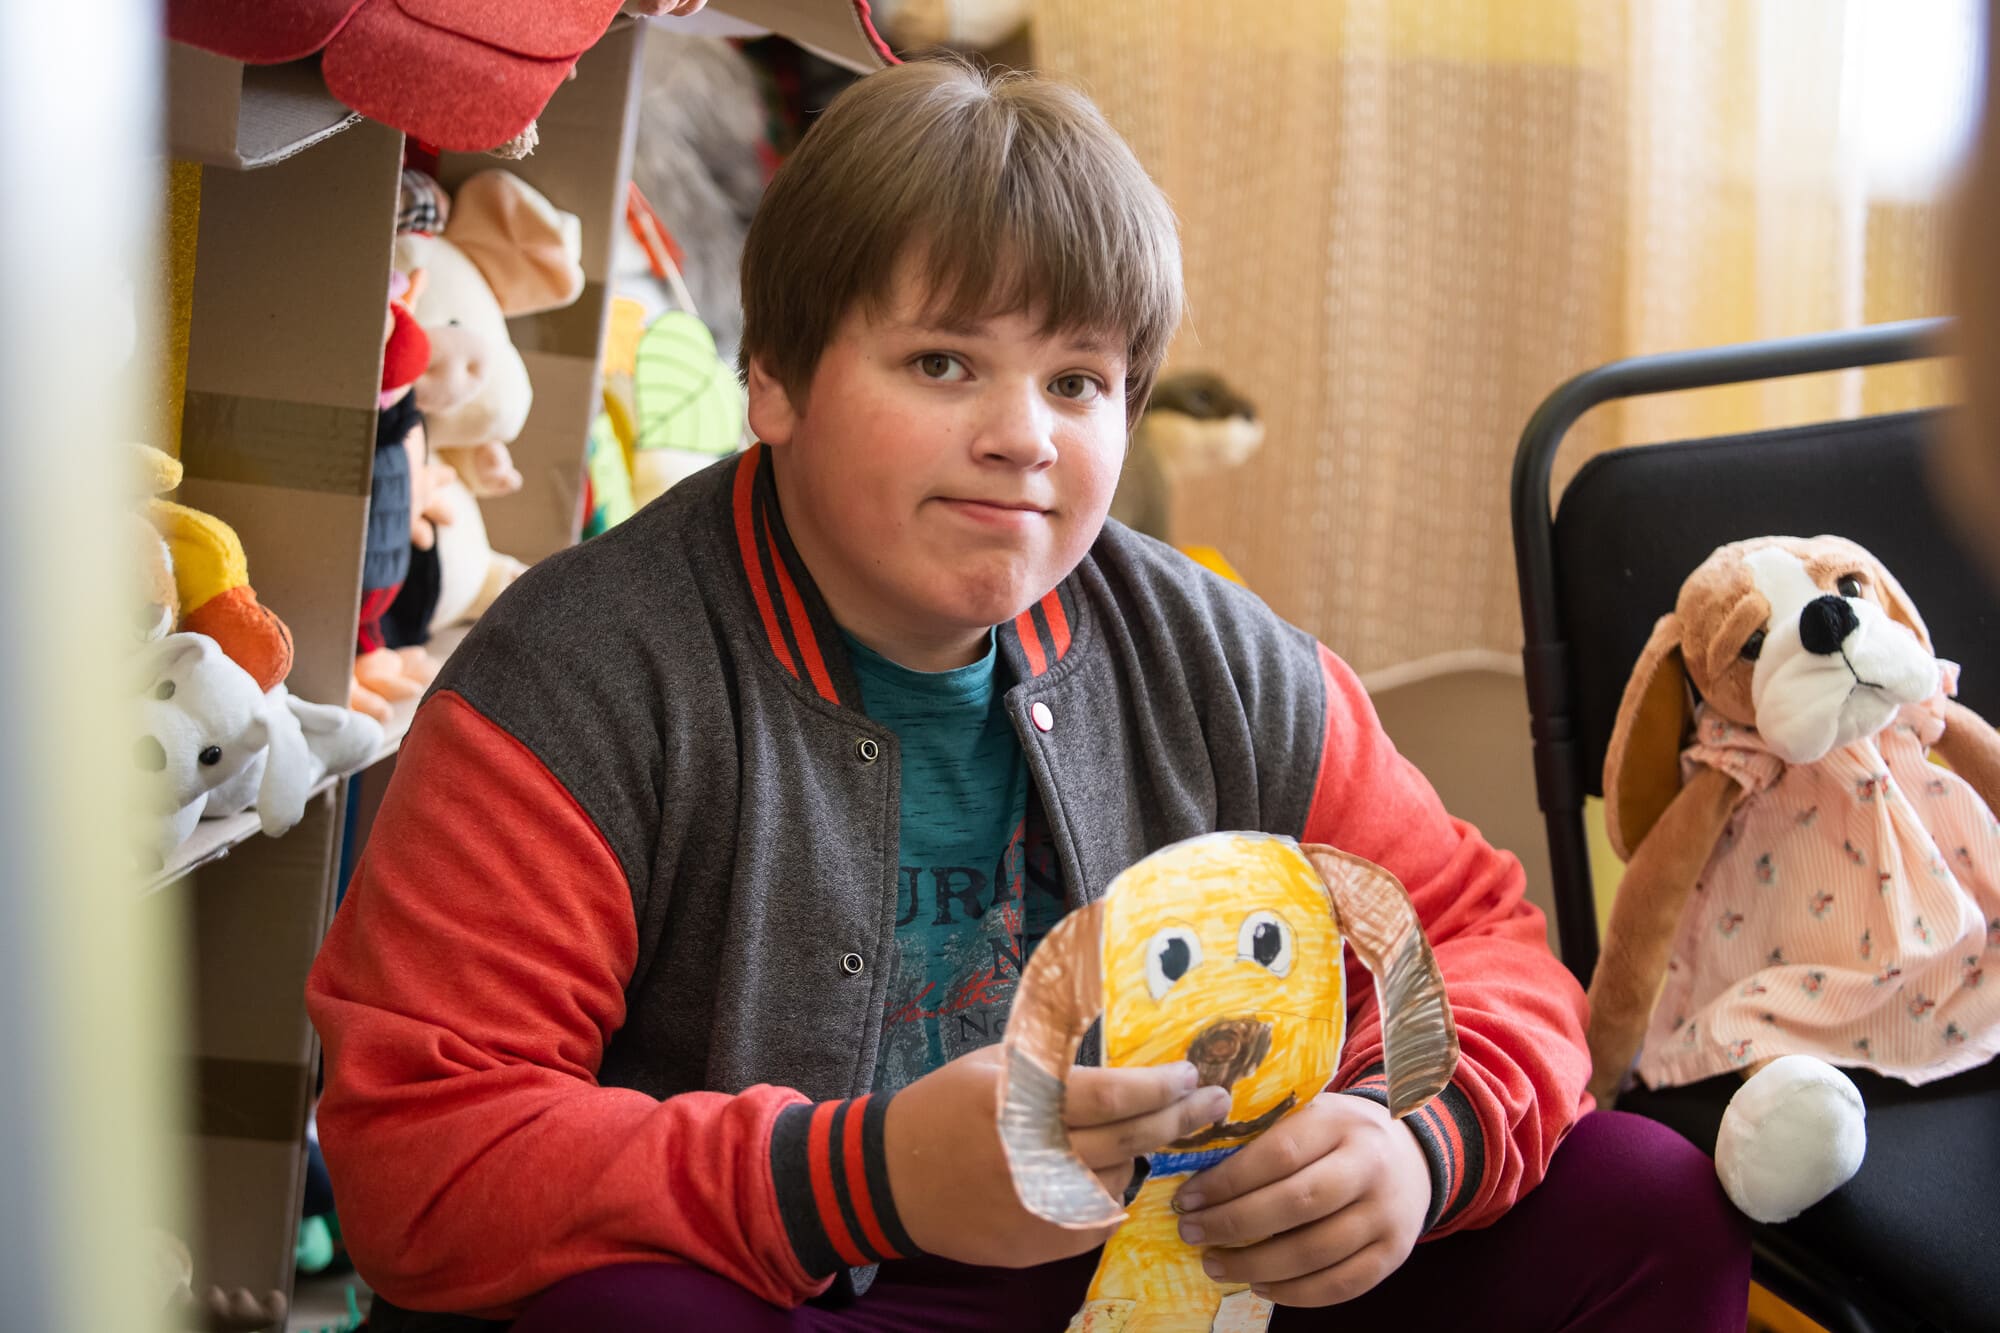 Andrii*, a Ukrainian boy with autism, clutches his drawing of a hibuki dog